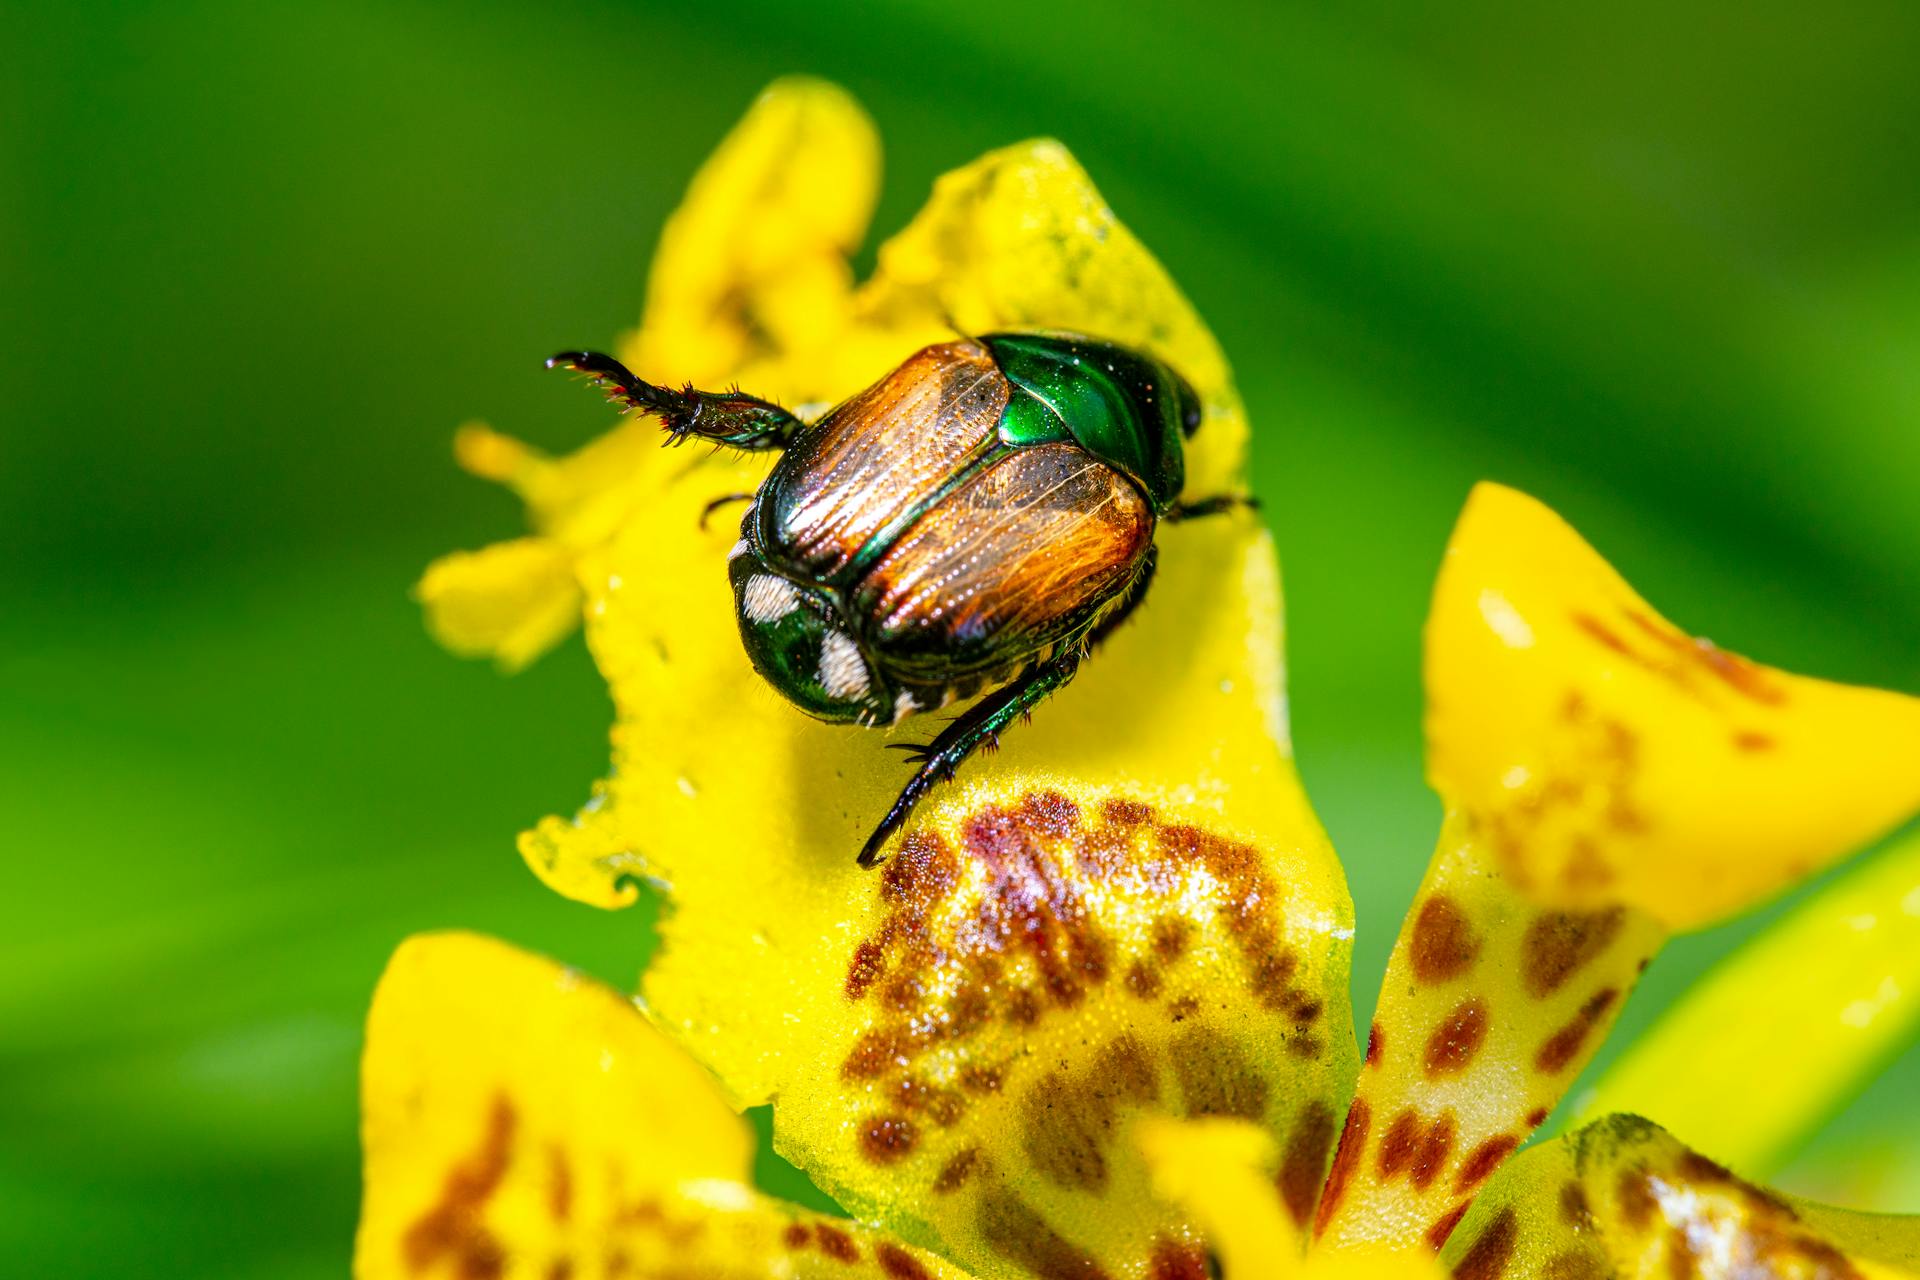 a Japanese beetle crawling on a blossom yellow flower